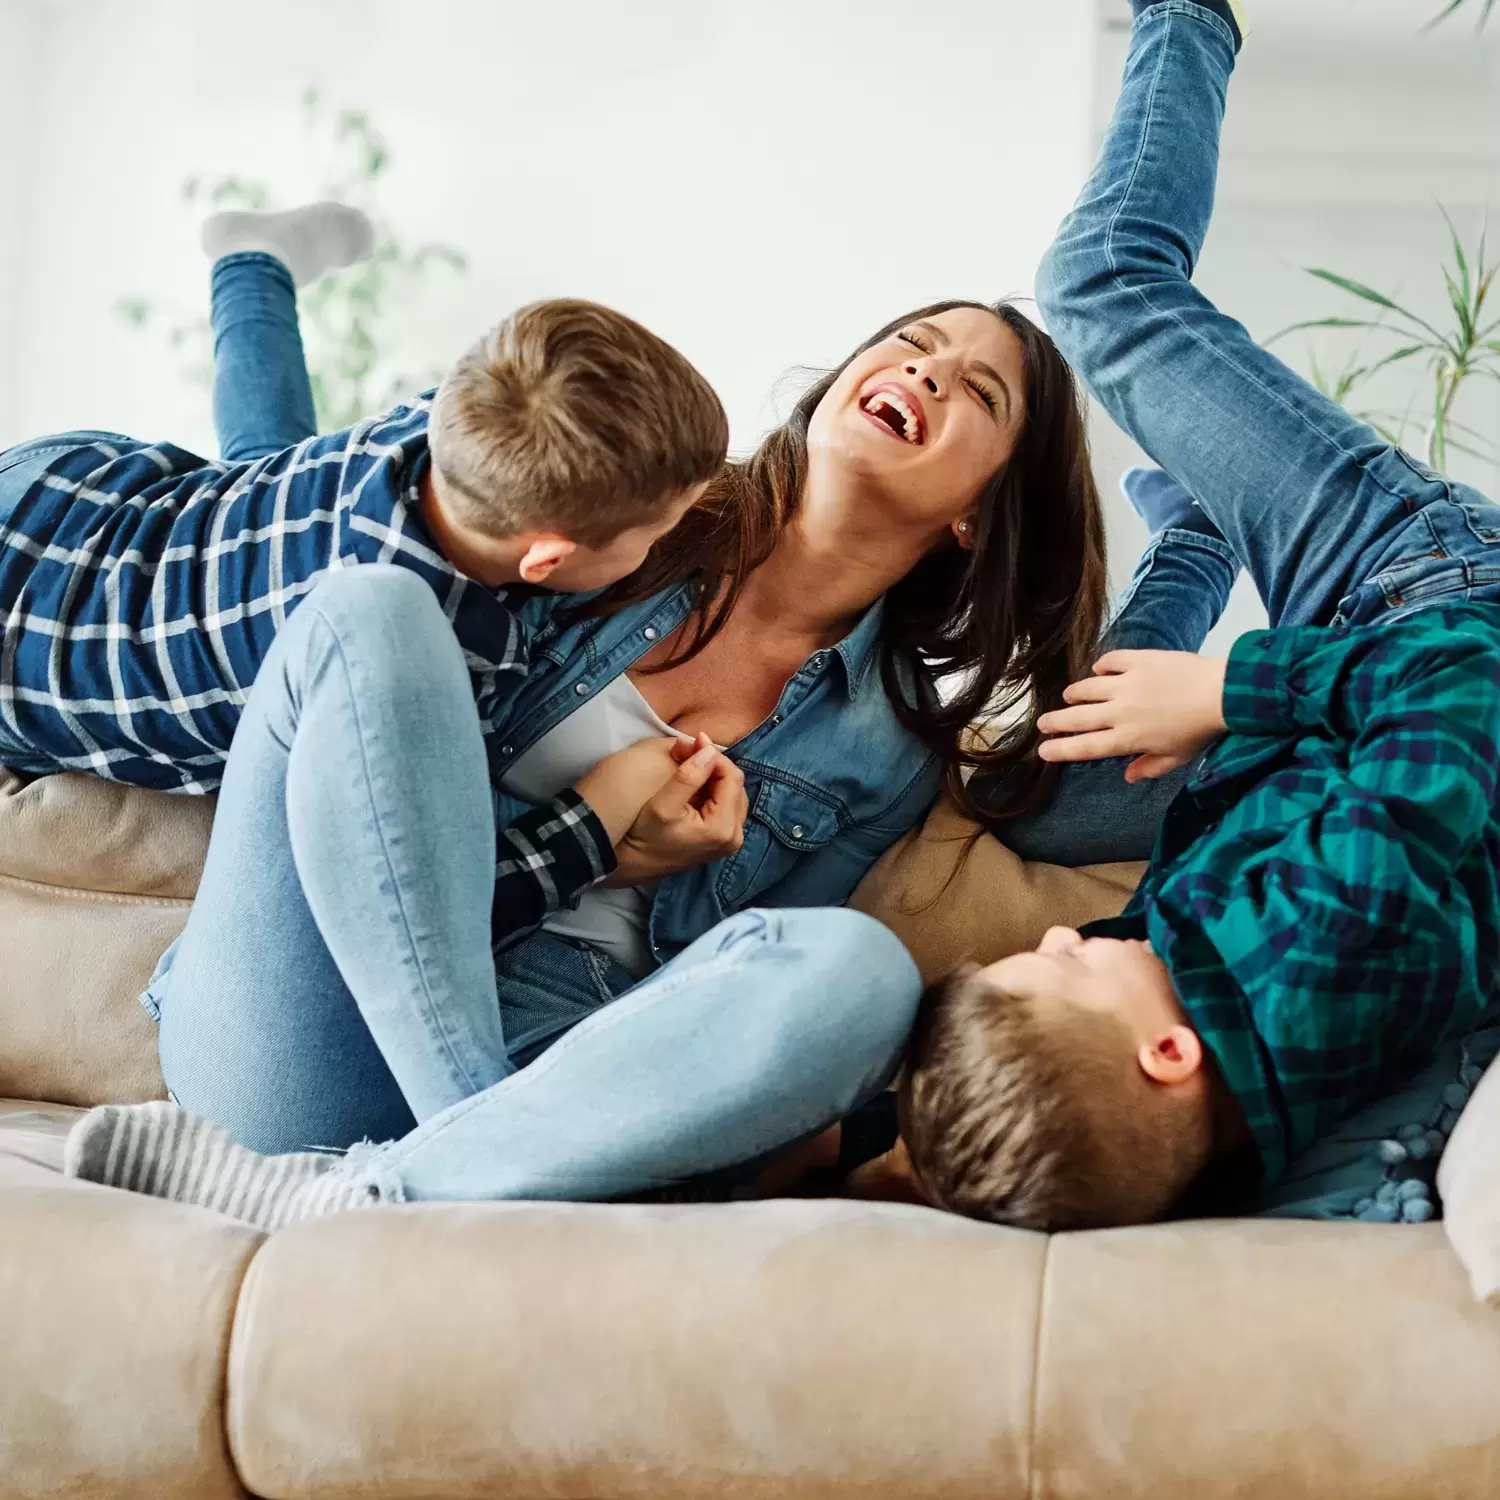 Mom and kids laughing on couch